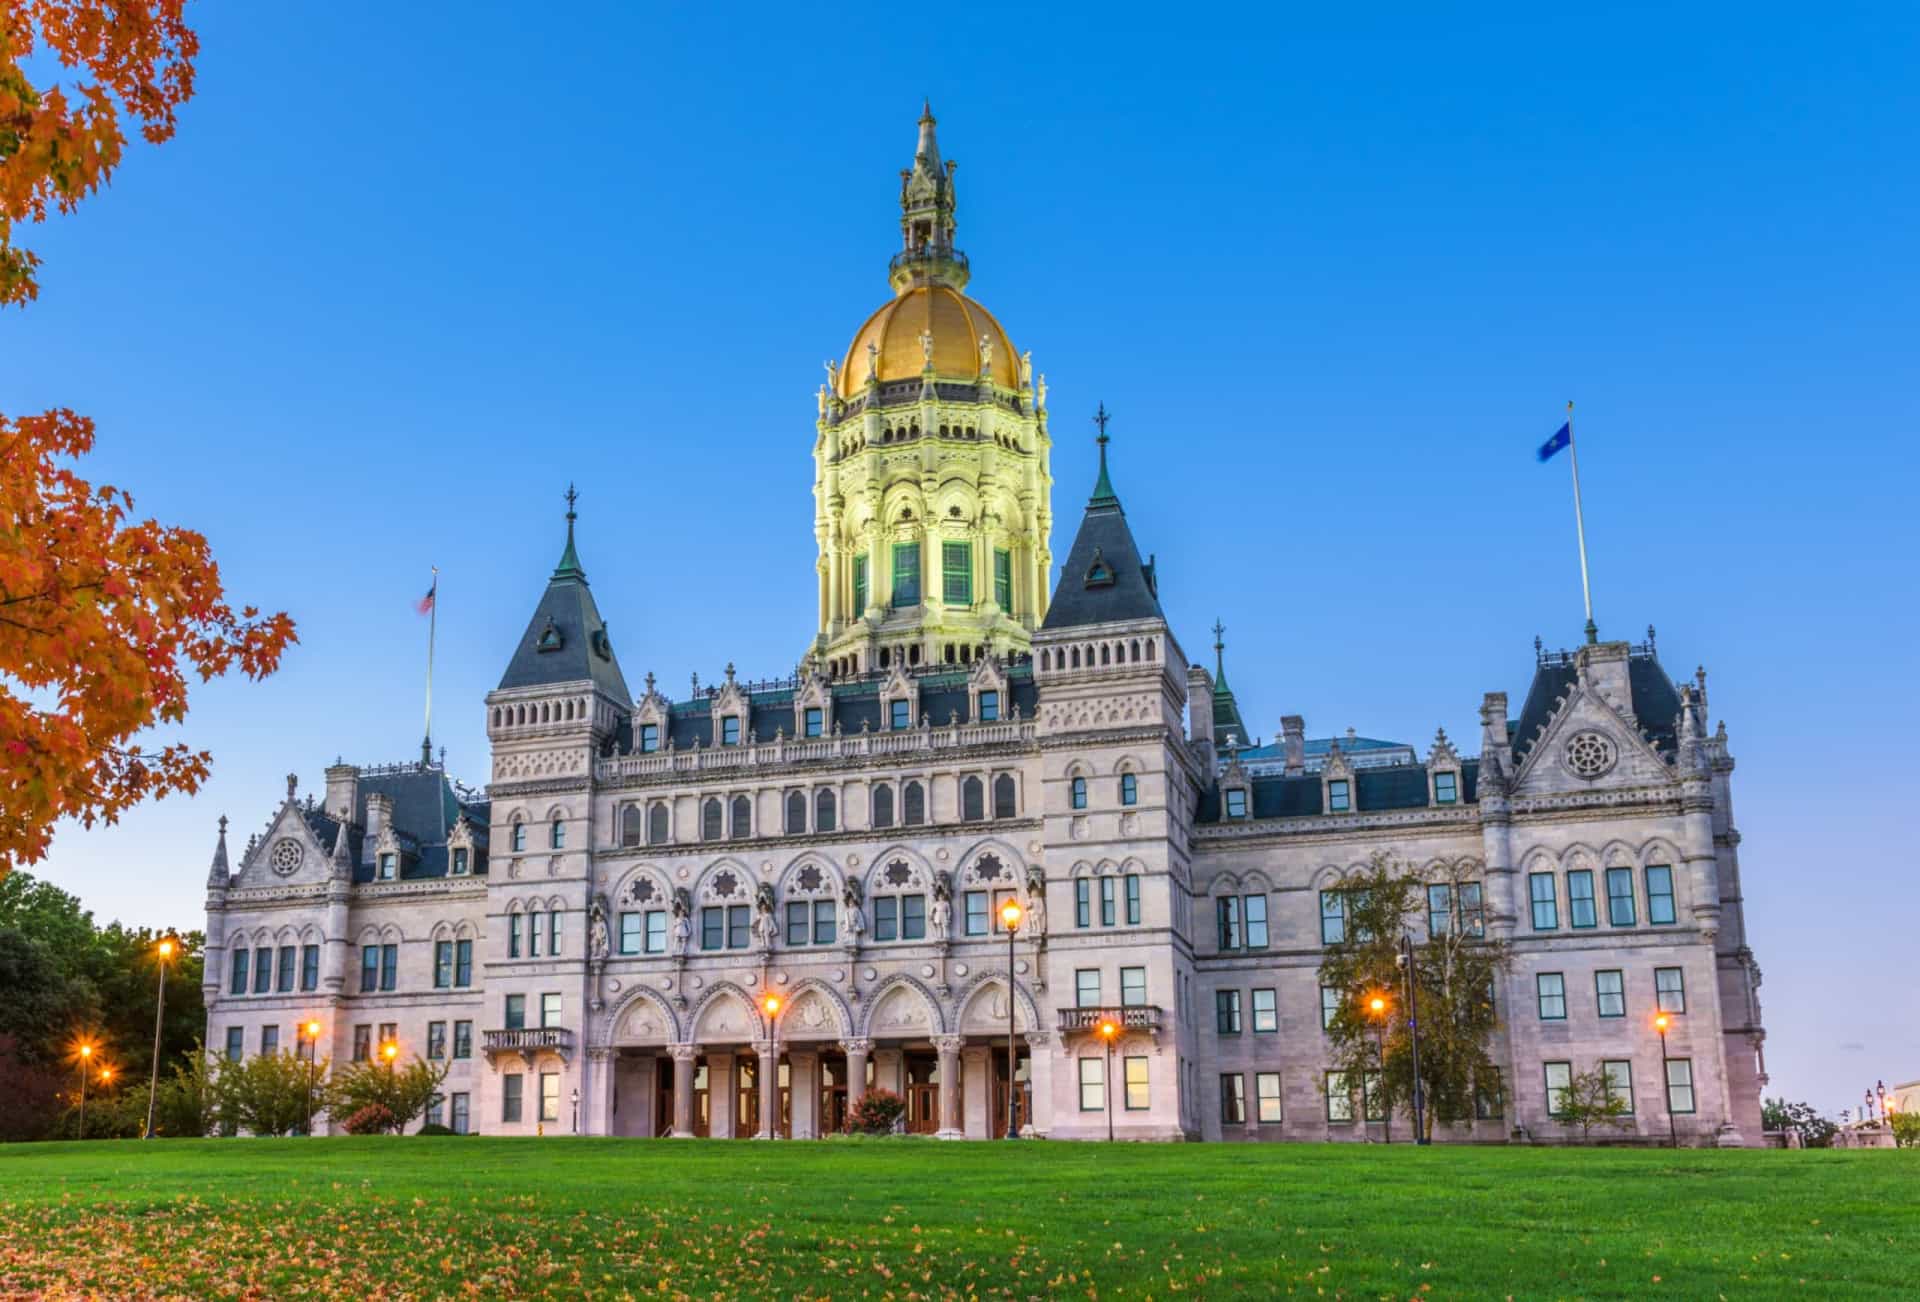 <p>There's no mistaking the Connecticut <a href="https://www.starsinsider.com/travel/490266/americas-most-illustrious-state-capitol-buildings" rel="noopener">State Capitol</a>. Completed in 1878 and wrapped in marble and granite, this impressive building is open to the public. A tour of the ornate interior takes in the Hall of Flags, numerous statues of politicians and other people important to the state's history, and the central domed tower with its decorative rotunda.</p><p>You may also like: <a href="https://www.starsinsider.com/n/208763?utm_source=msn.com&utm_medium=display&utm_campaign=referral_description&utm_content=513982en-us">Sixteen countries that are more obese than the US</a></p>